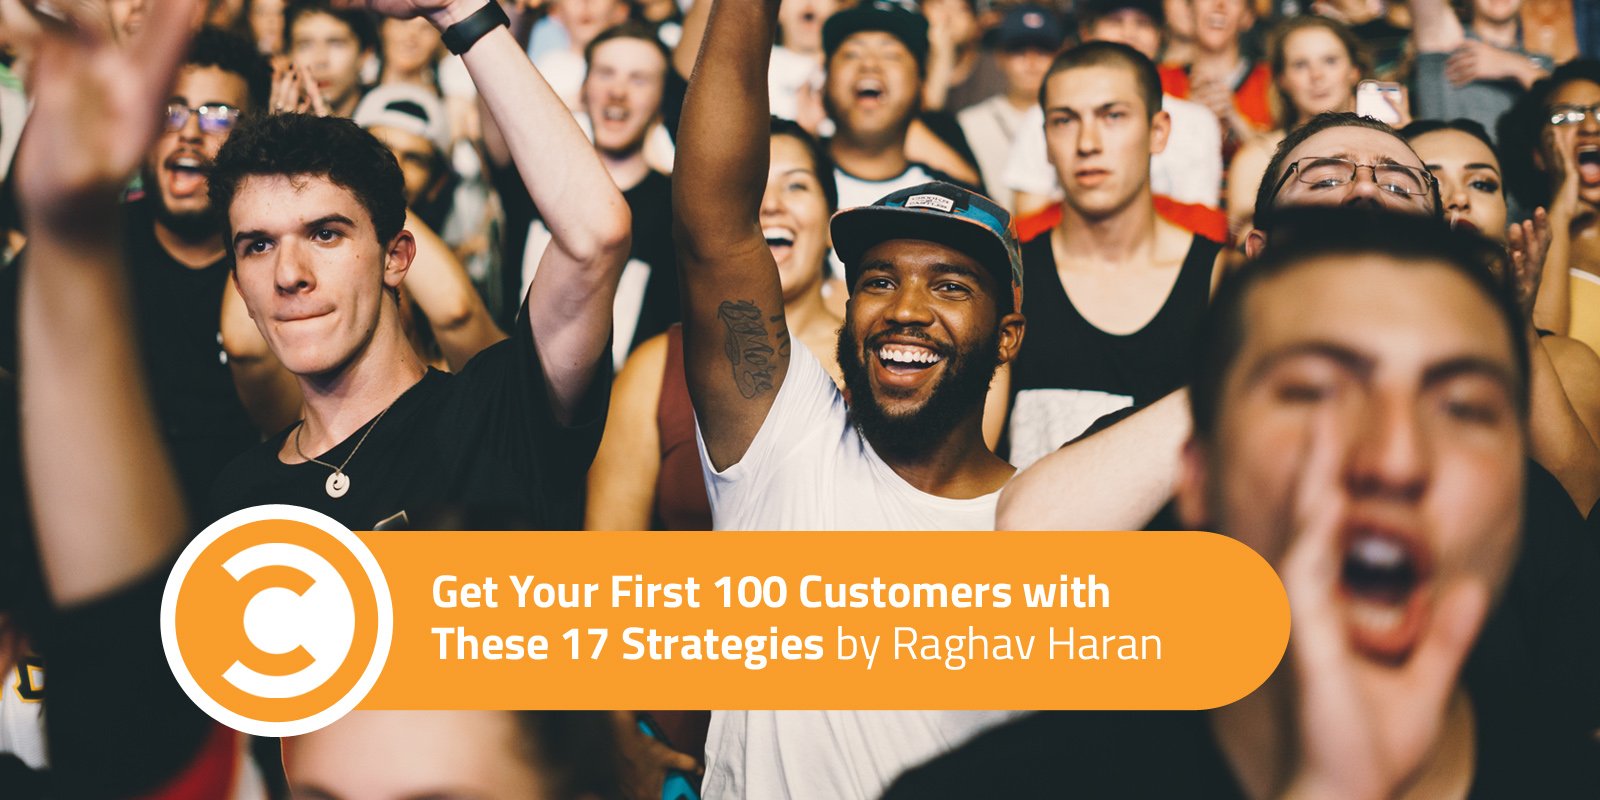 Get Your First 100 Customers with These 17 Strategies